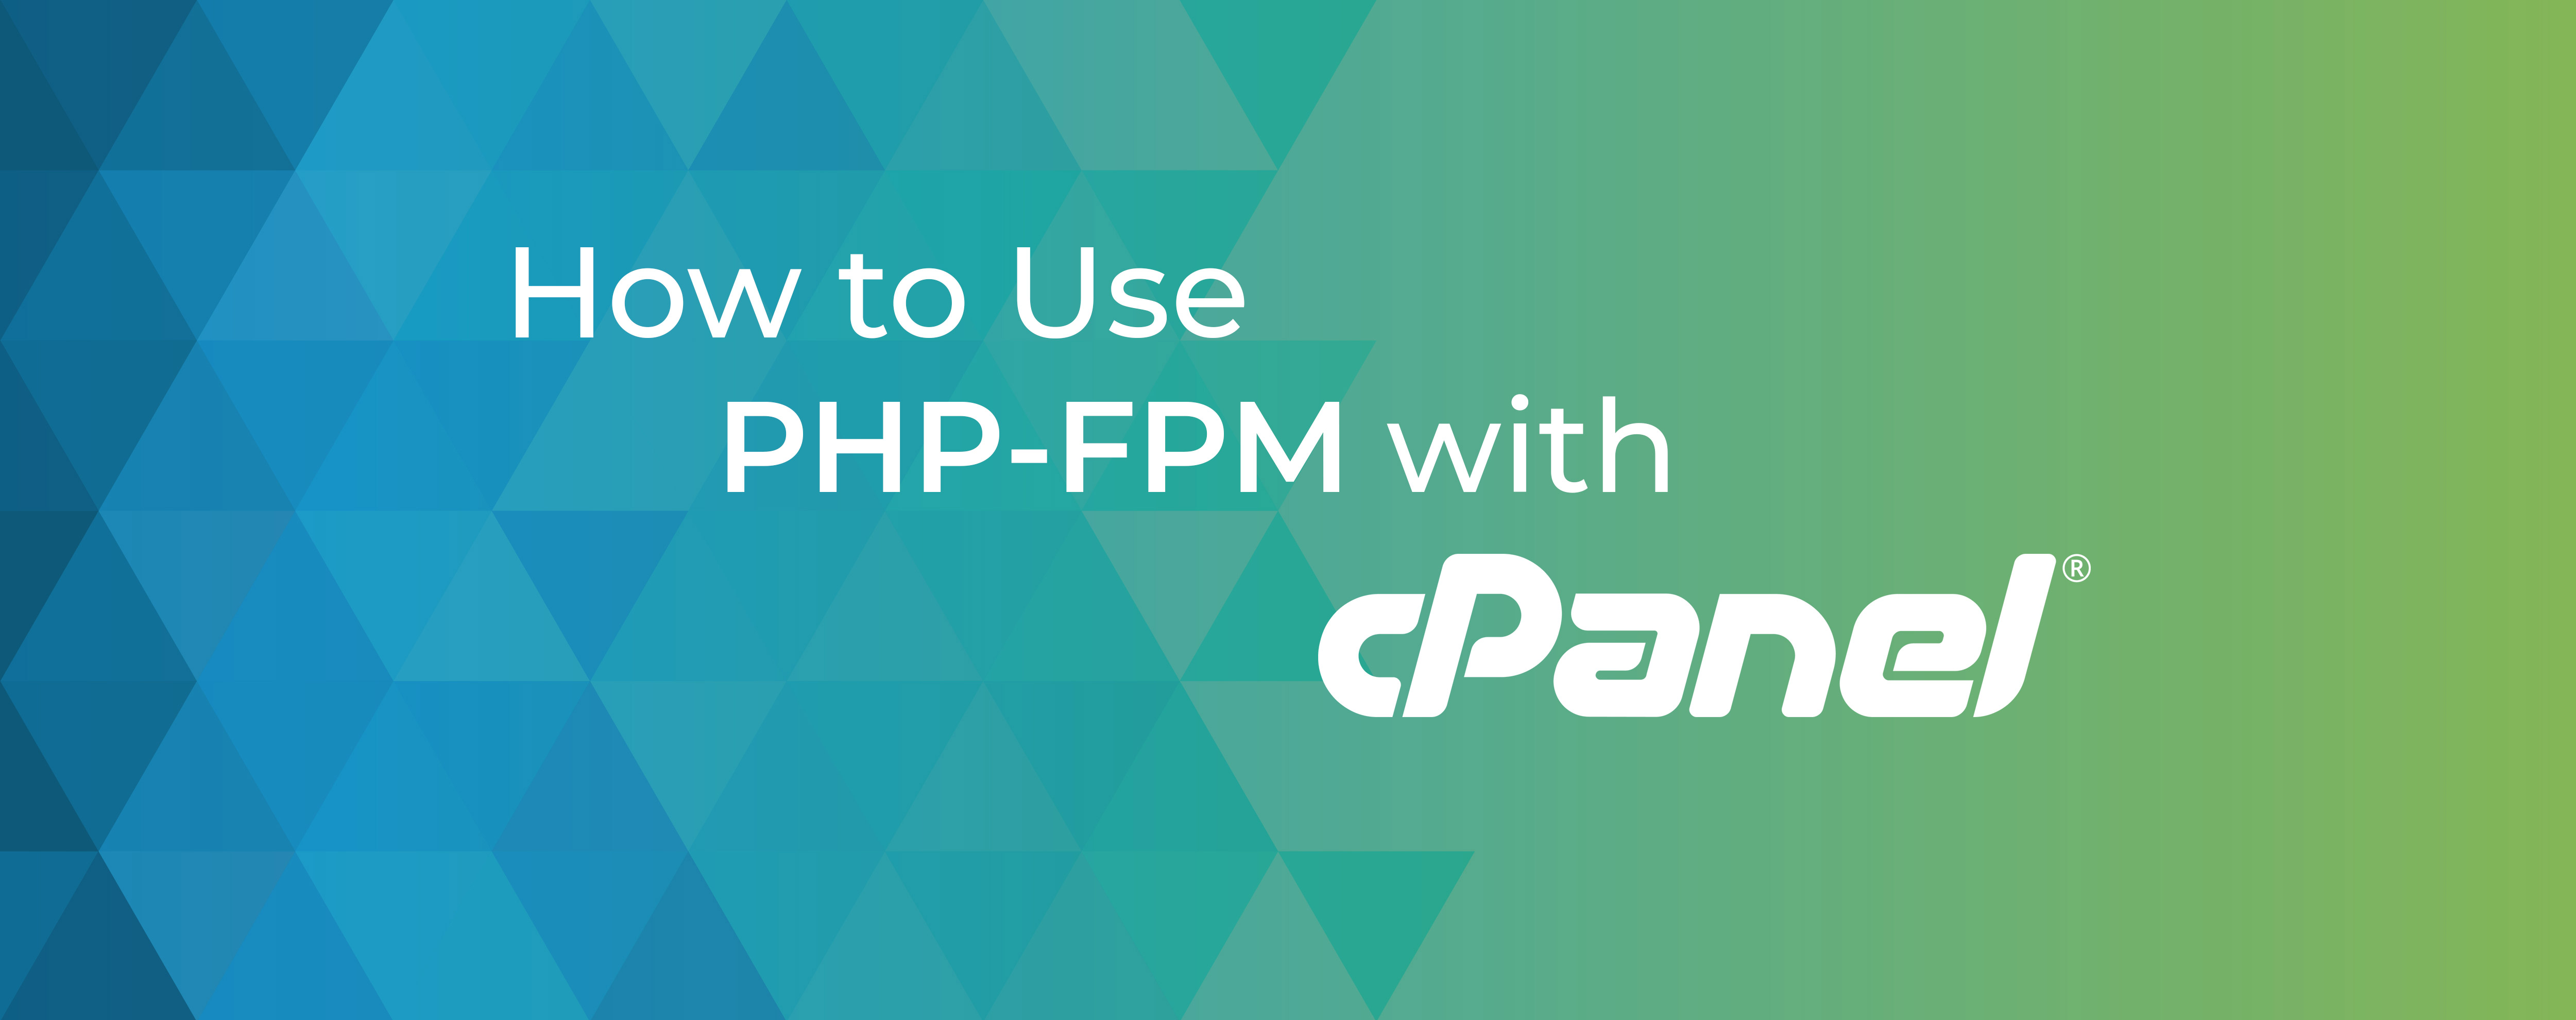 How to Use PHP-FPM with cPanel